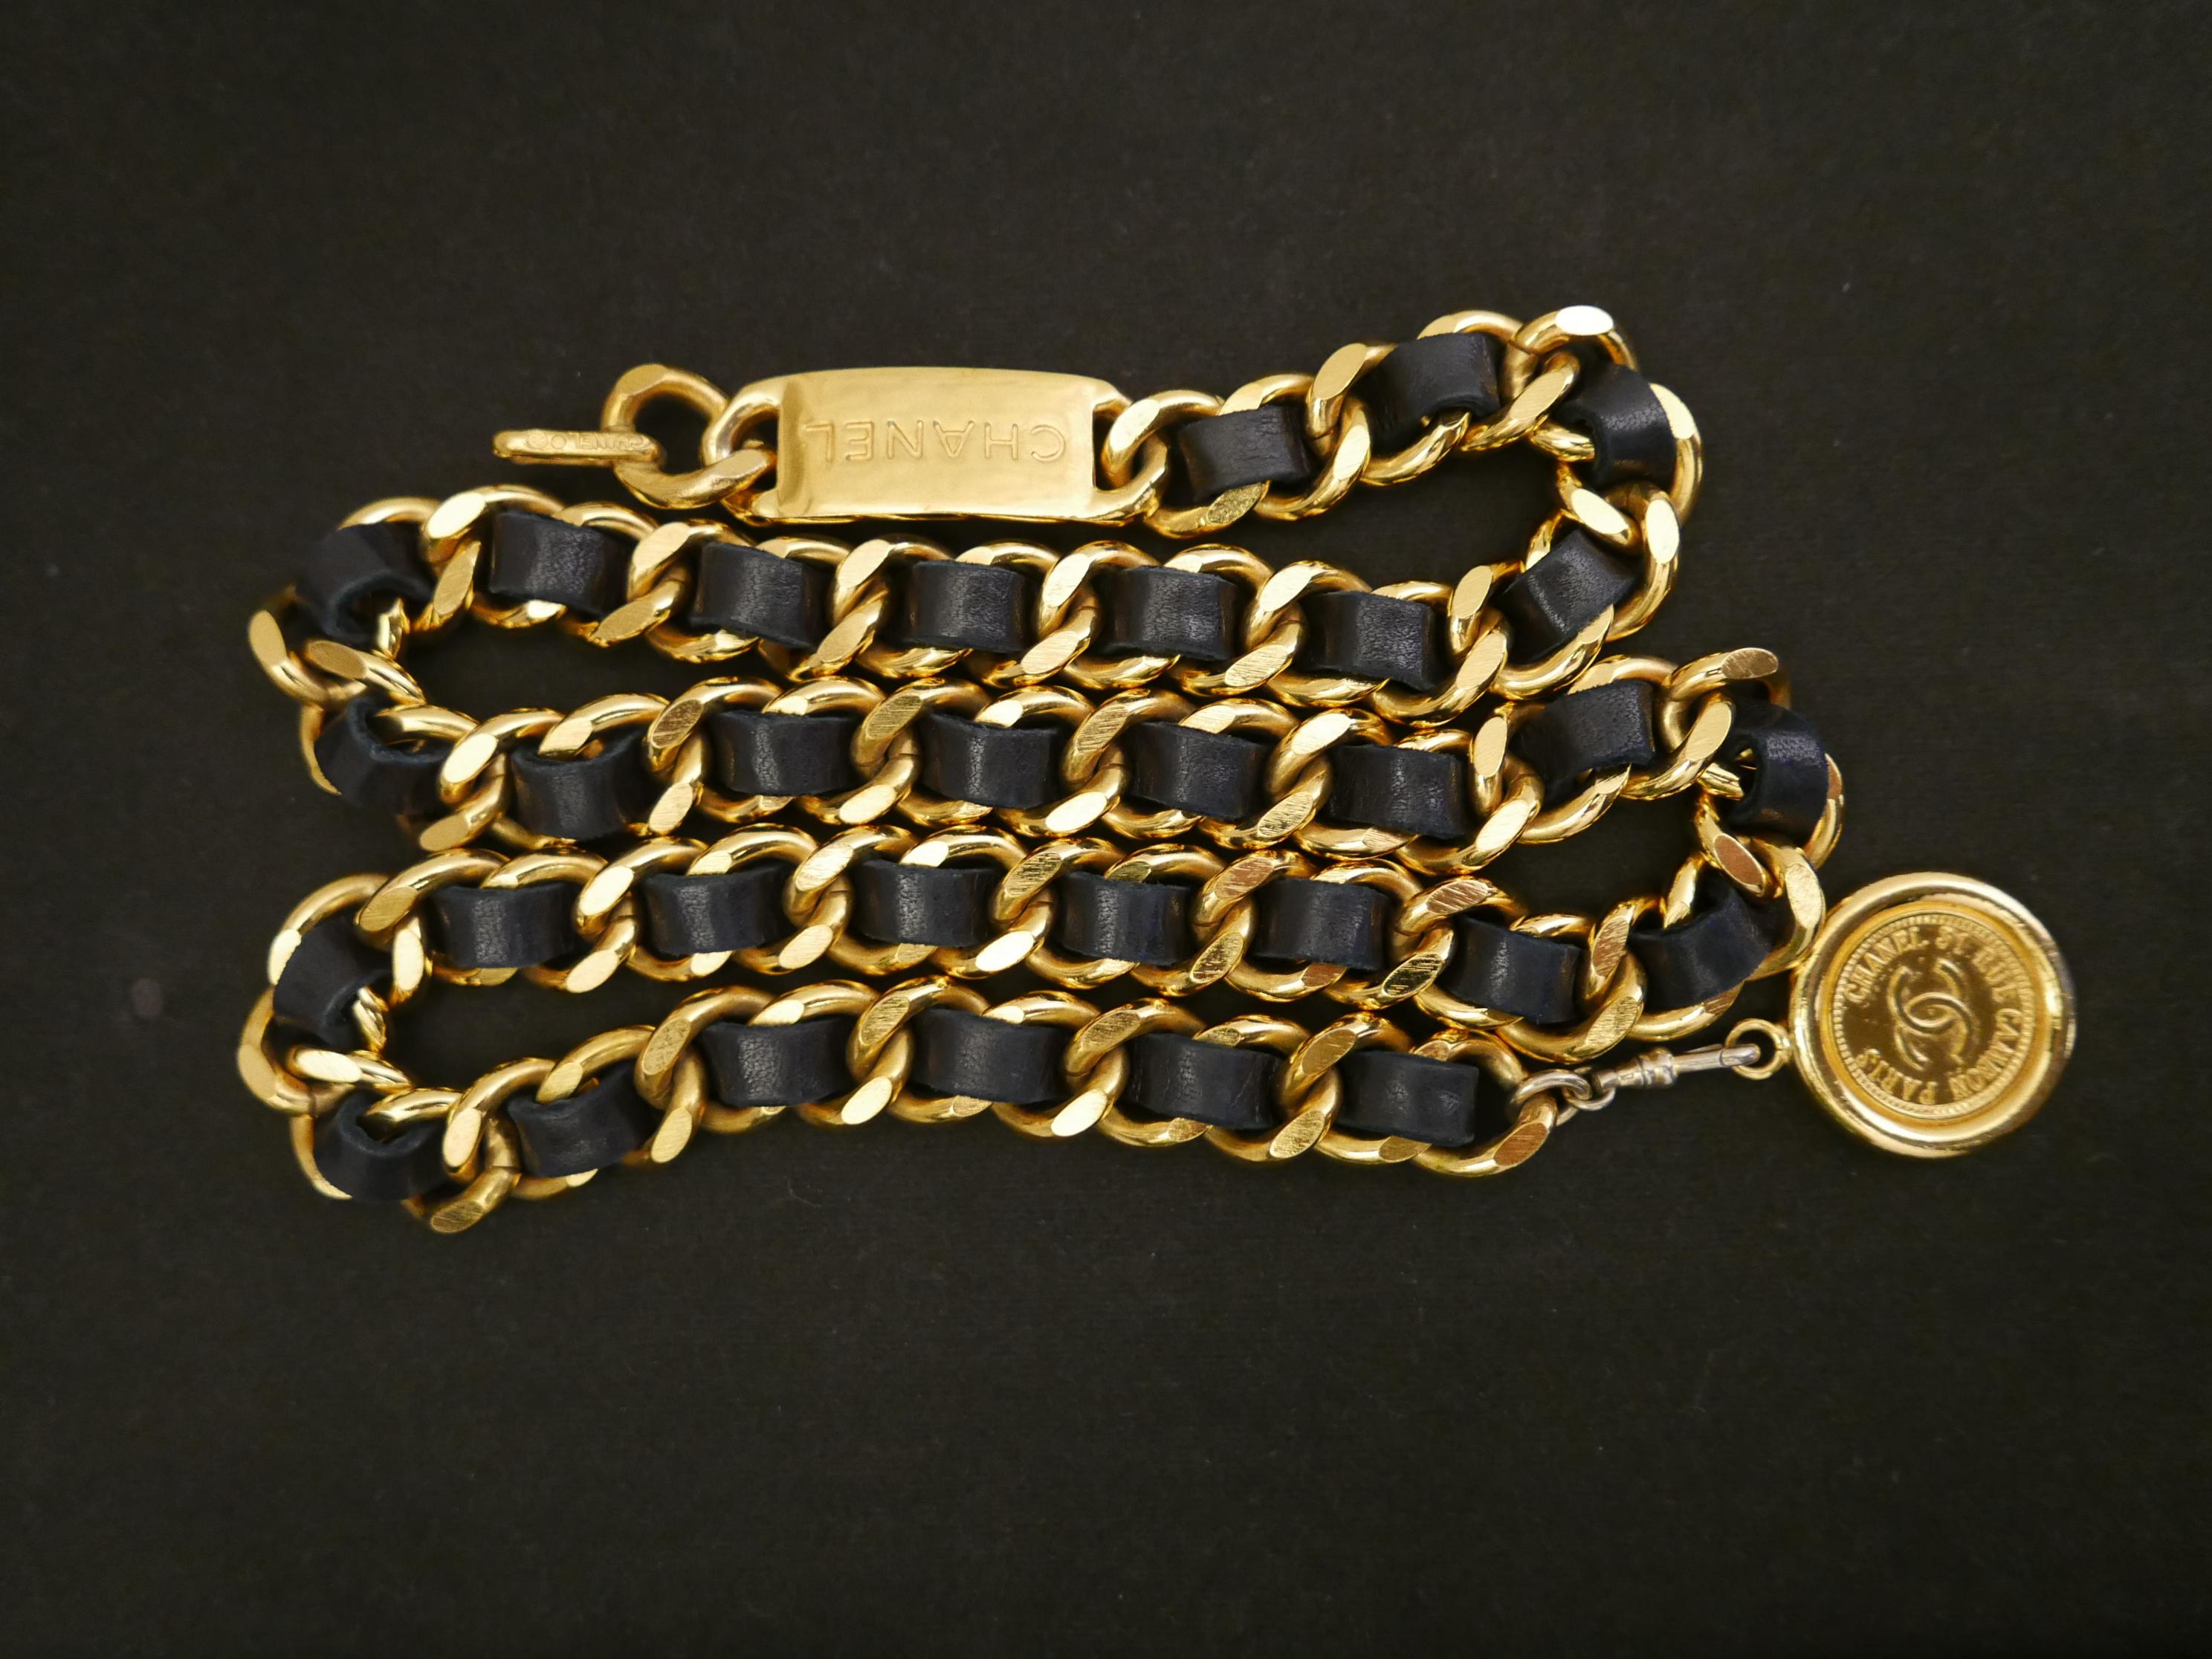 Vintage Chanel gold toned chain belt interlaced with black leather featuring a Coco coin charm. Stamped Chanel. Chain measures approximately 84 cm in length width 1.2 cm.

Condition - Minor signs of wear. Generally in good condition. Discoloration